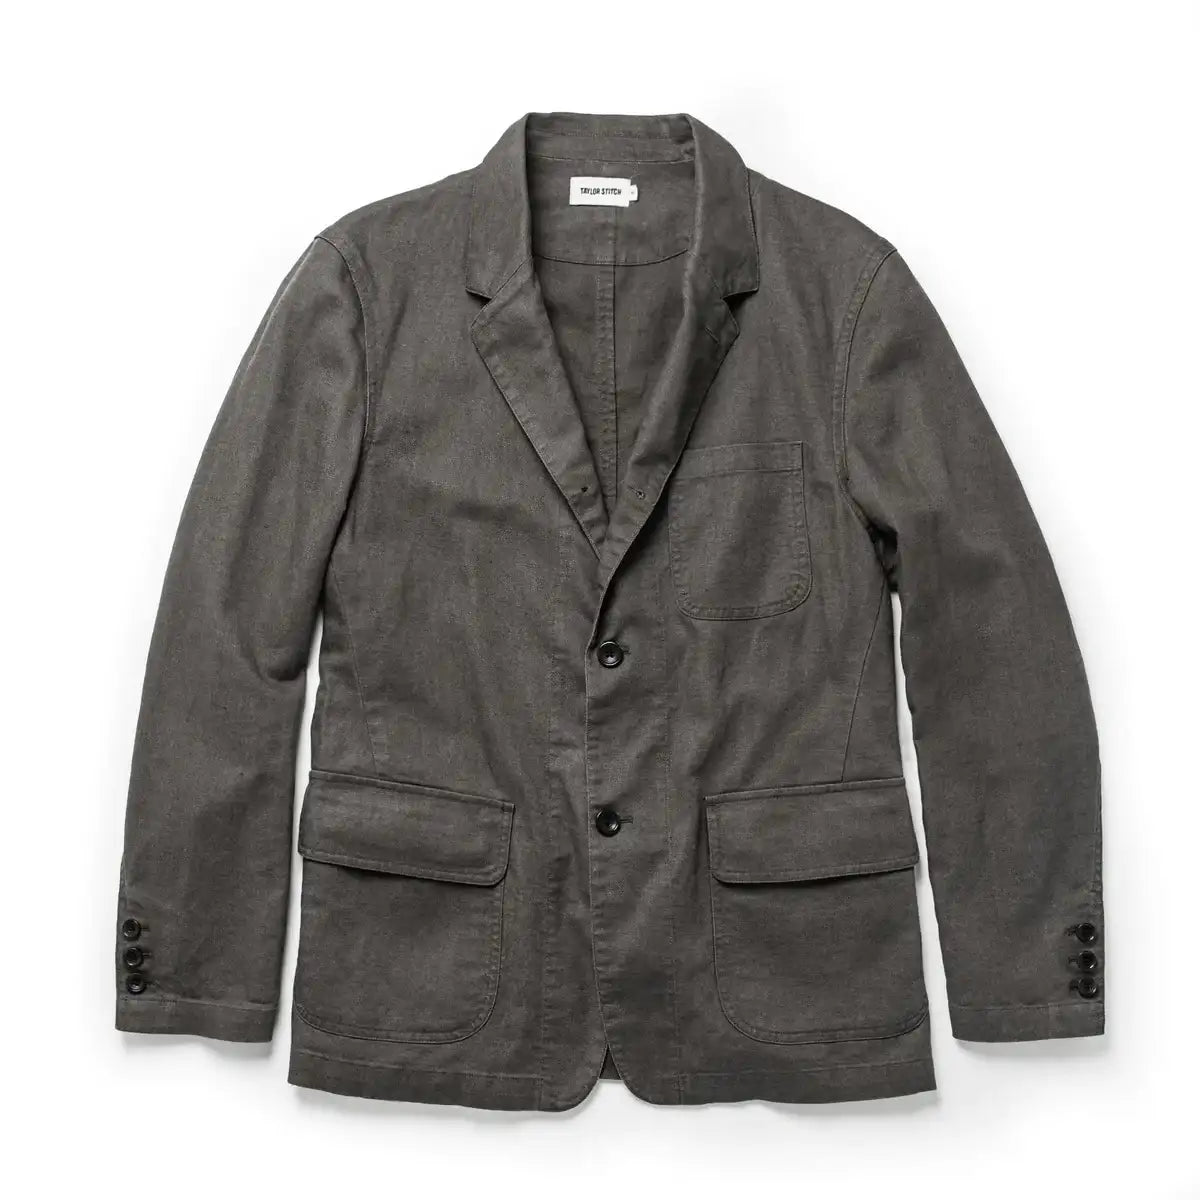 Taylor Stitch - TAYLOR STITCH THE GIBSON JACKET IN GRAVEL - Rent With Thred